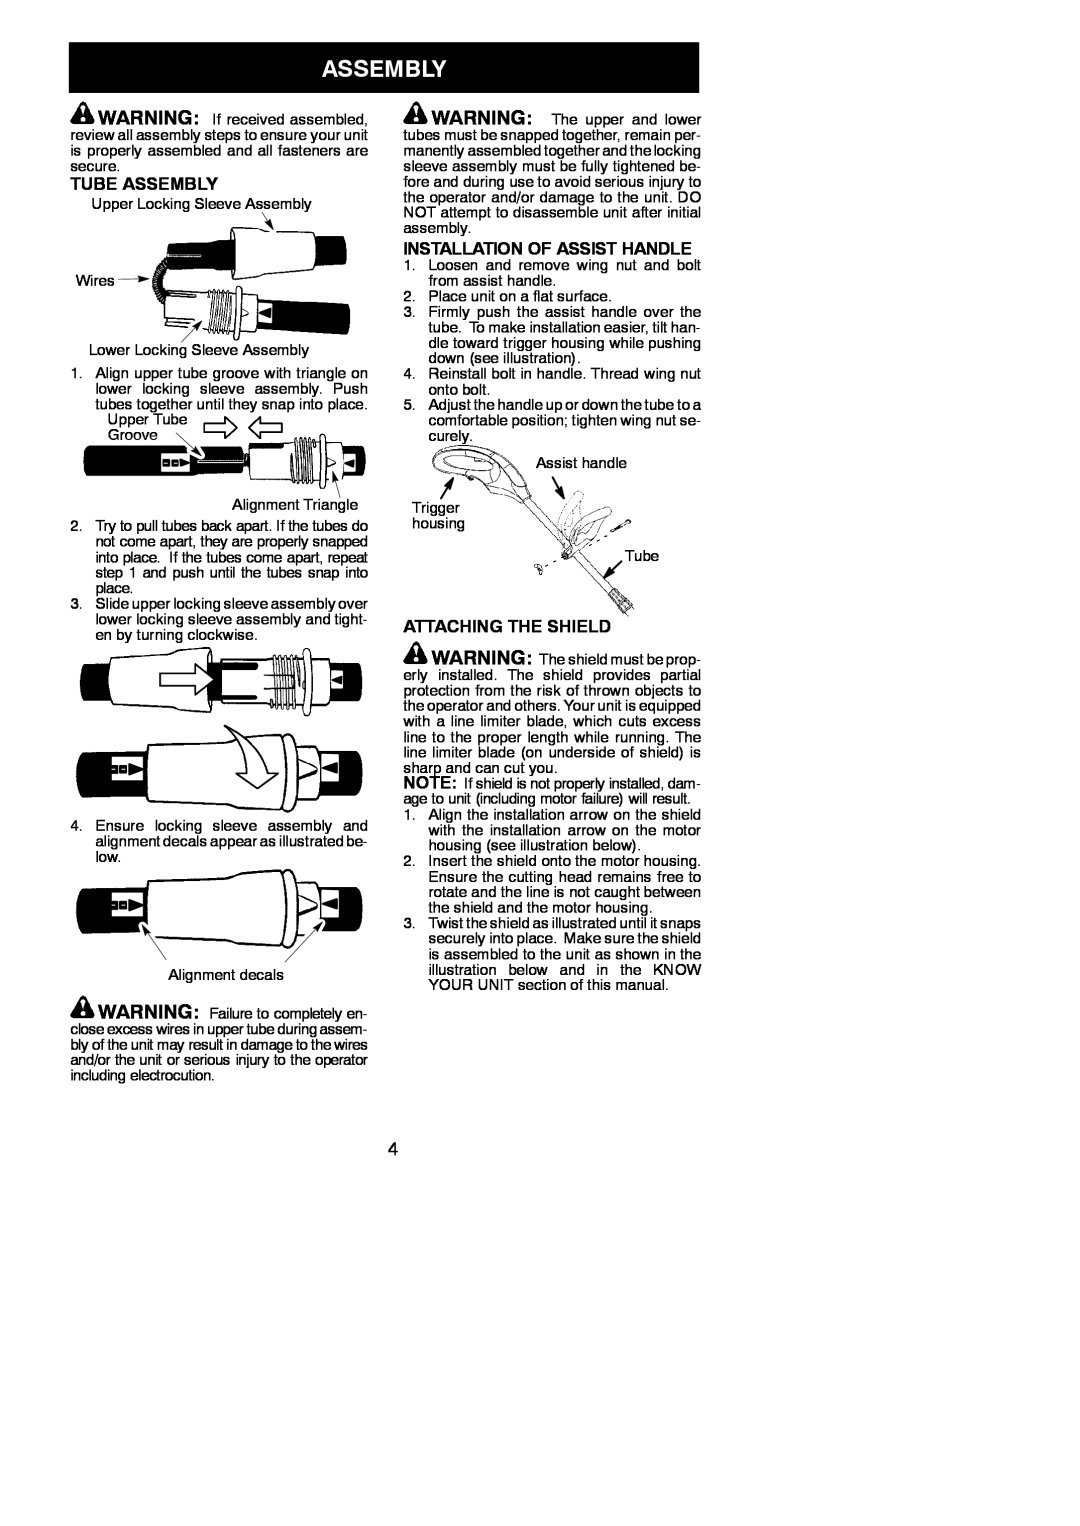 Weed Eater 545186760 instruction manual Tube Assembly, Installation Of Assist Handle, Attaching The Shield 